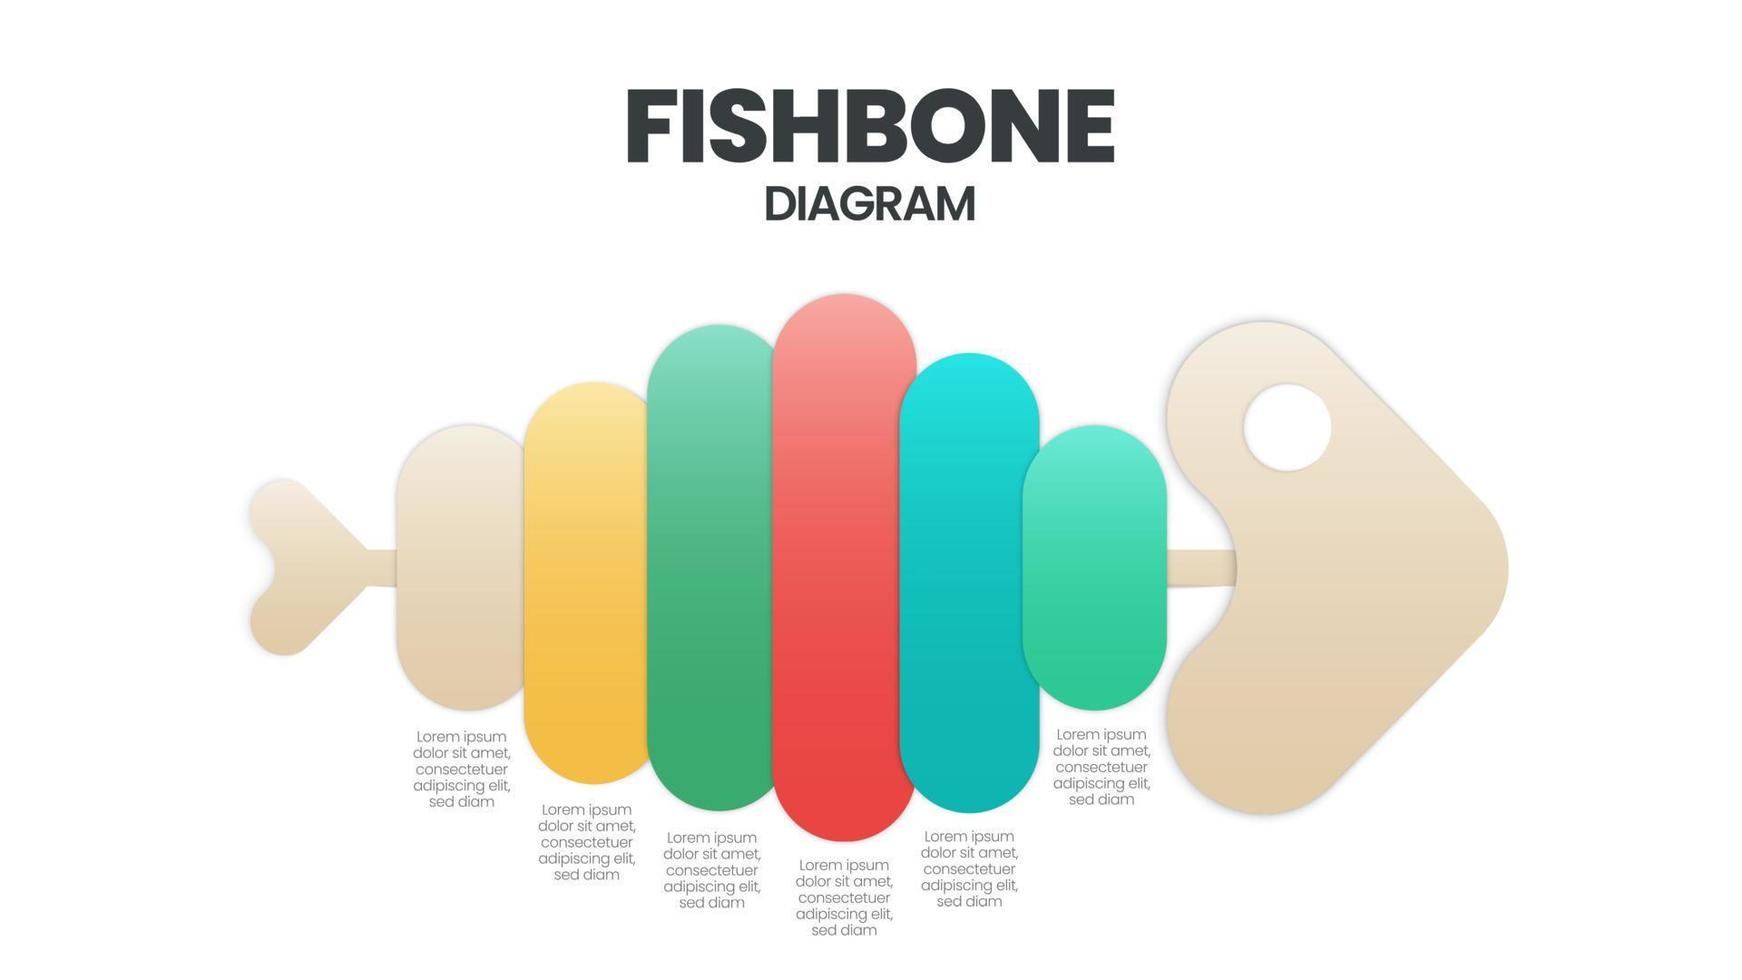 The vector featured a fish skeleton. A template is a tool to analyze and brainstorm the root causes of an effect and solution. A fishbone diagram presentation is a cause-and-effect Ishikawa diagram.